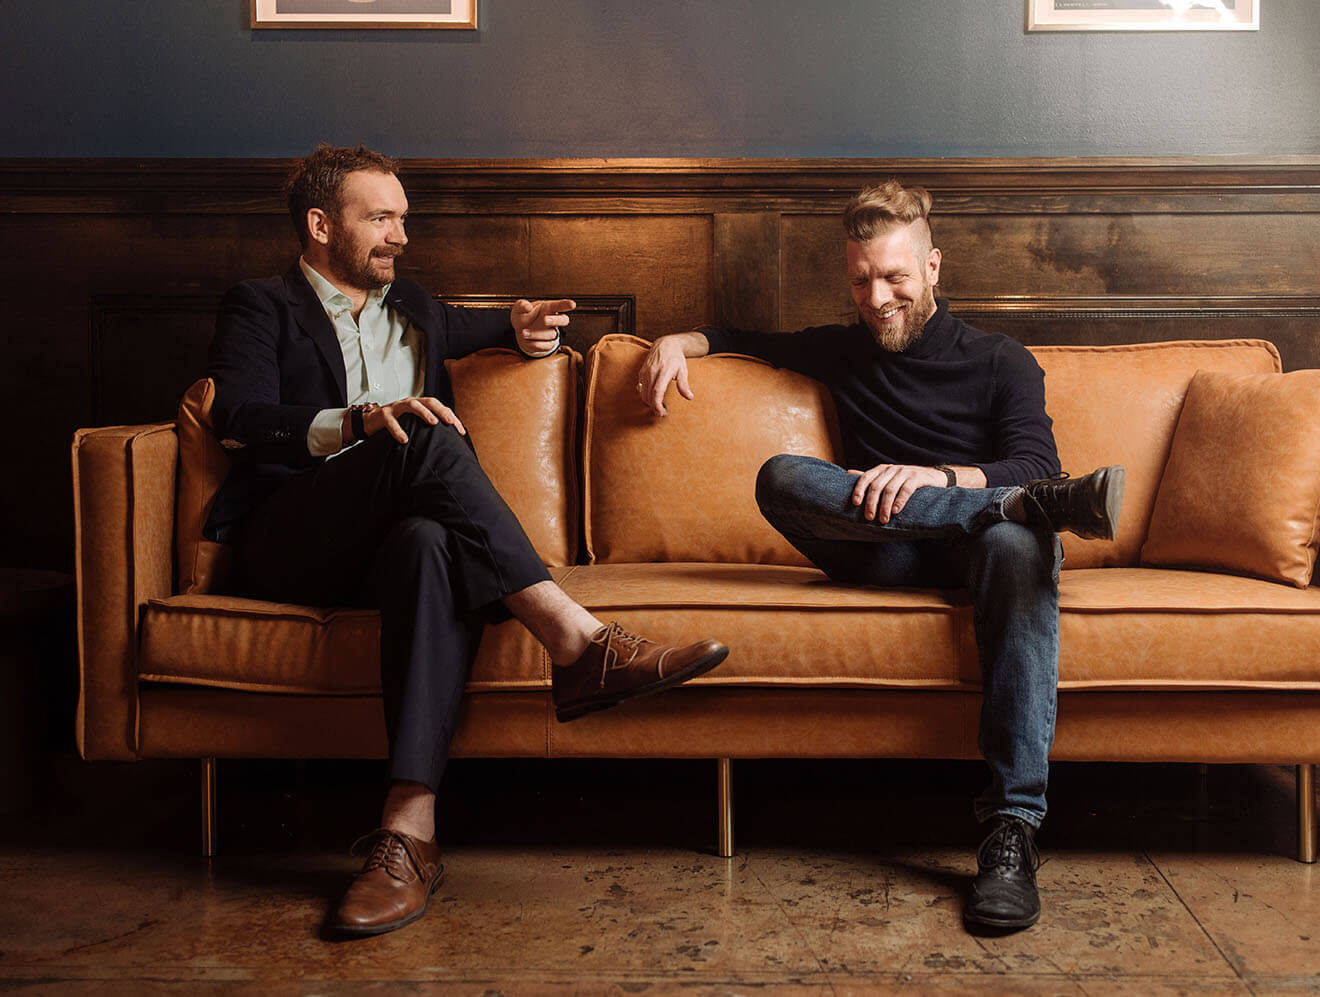 Owners Lucas Bradbury and Benjamin Krick, sitting on couch in conversation